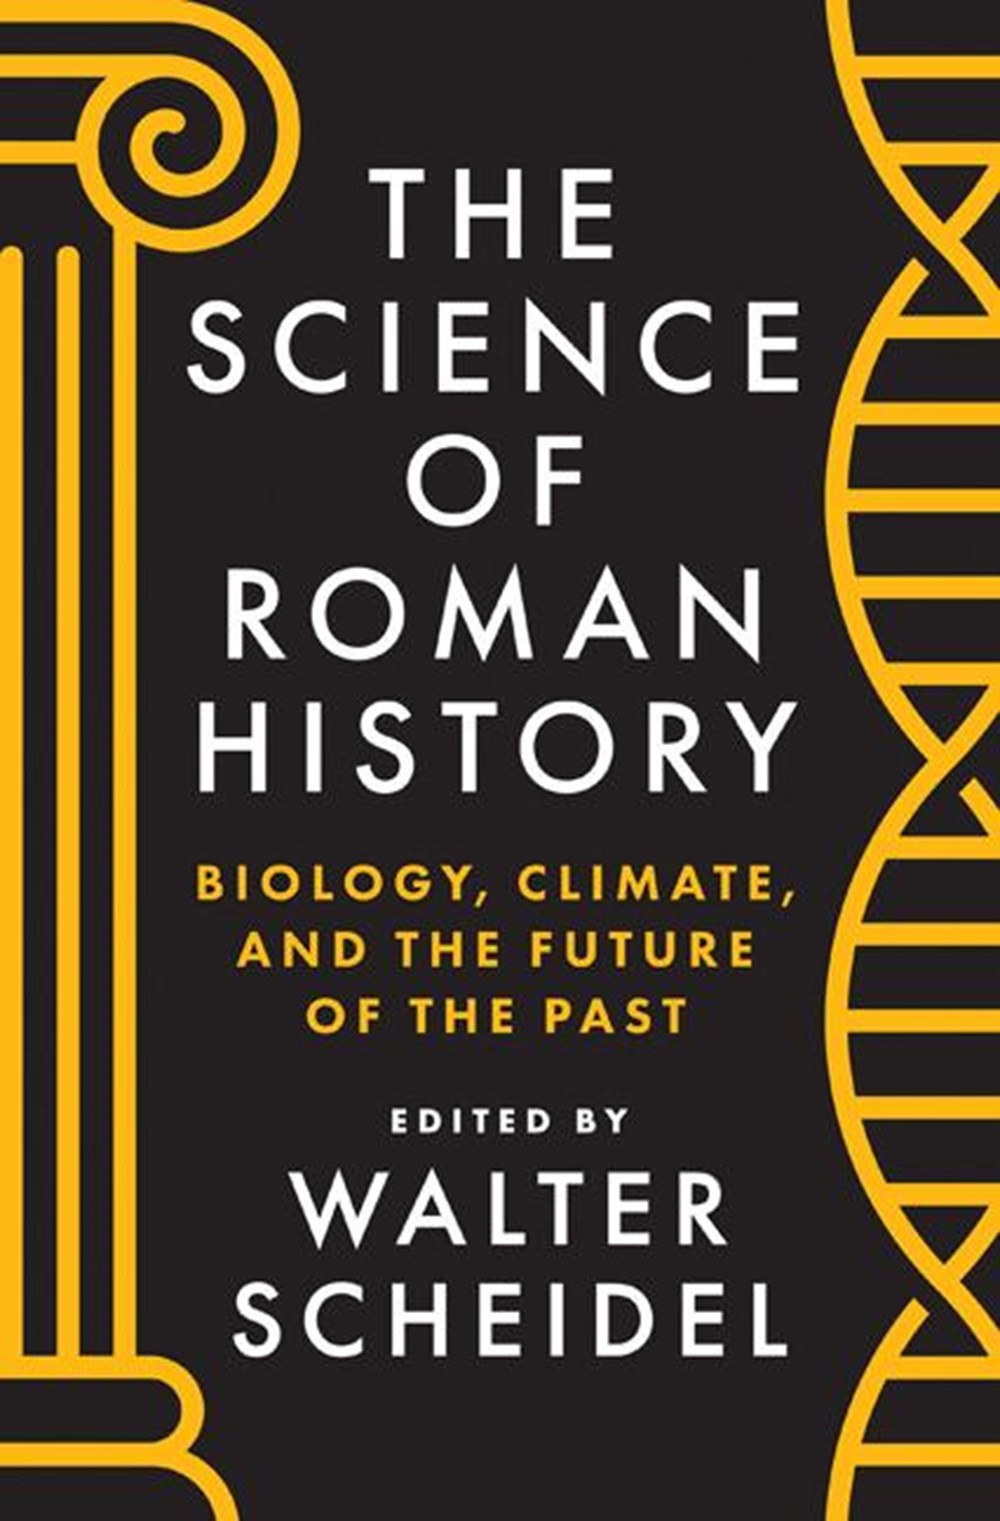 Science of Roman History: Biology, Climate, and the Future of the Past